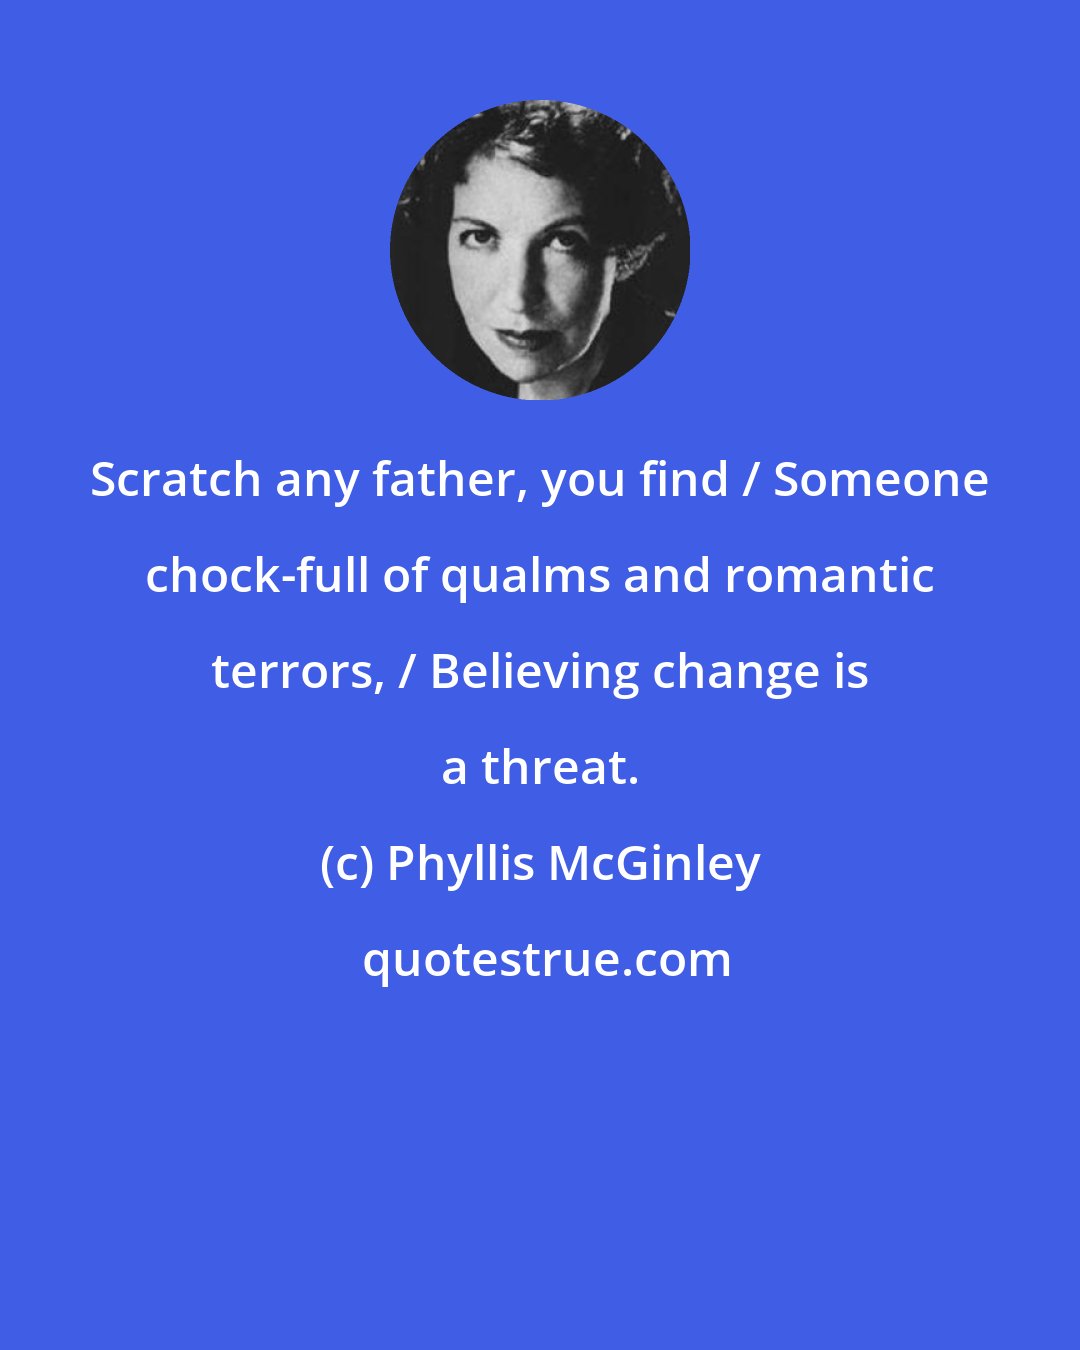 Phyllis McGinley: Scratch any father, you find / Someone chock-full of qualms and romantic terrors, / Believing change is a threat.